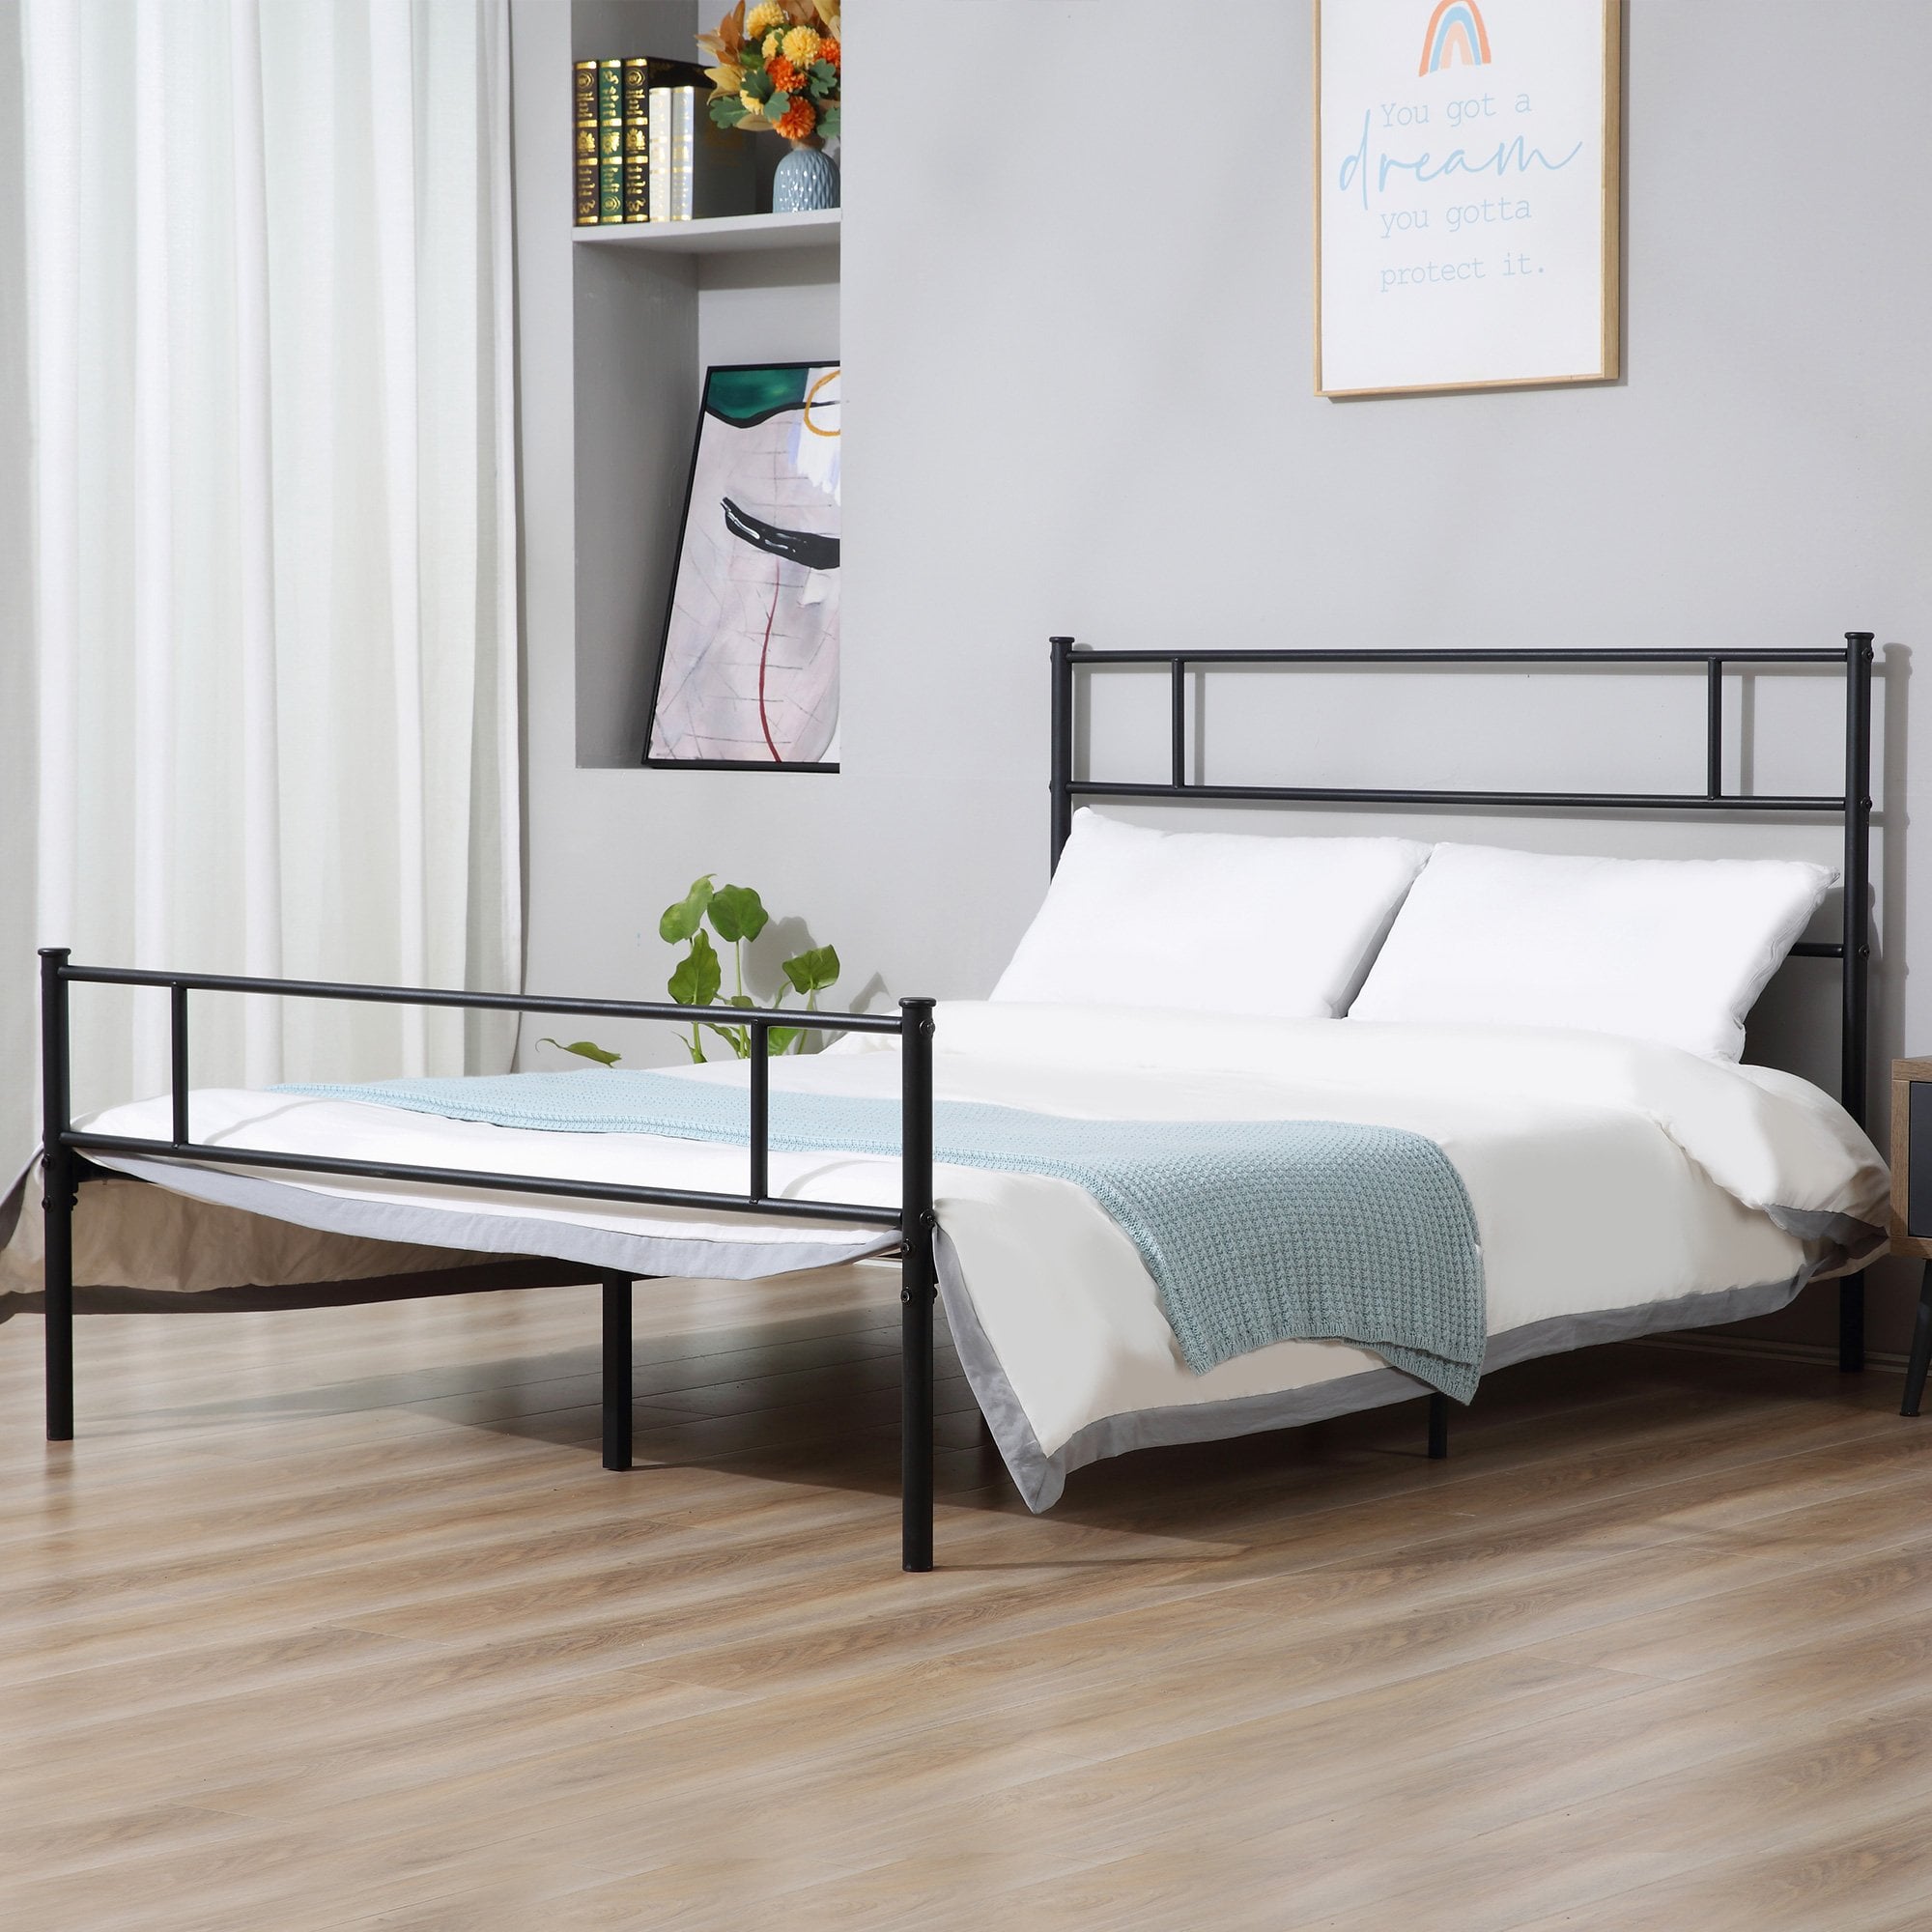 King Metal Bed Frame Solid Bedstead Base with Headboard and Footboard - Metal Slat Support and Underbed Storage Space - Bedroom Furniture w/ Space - H